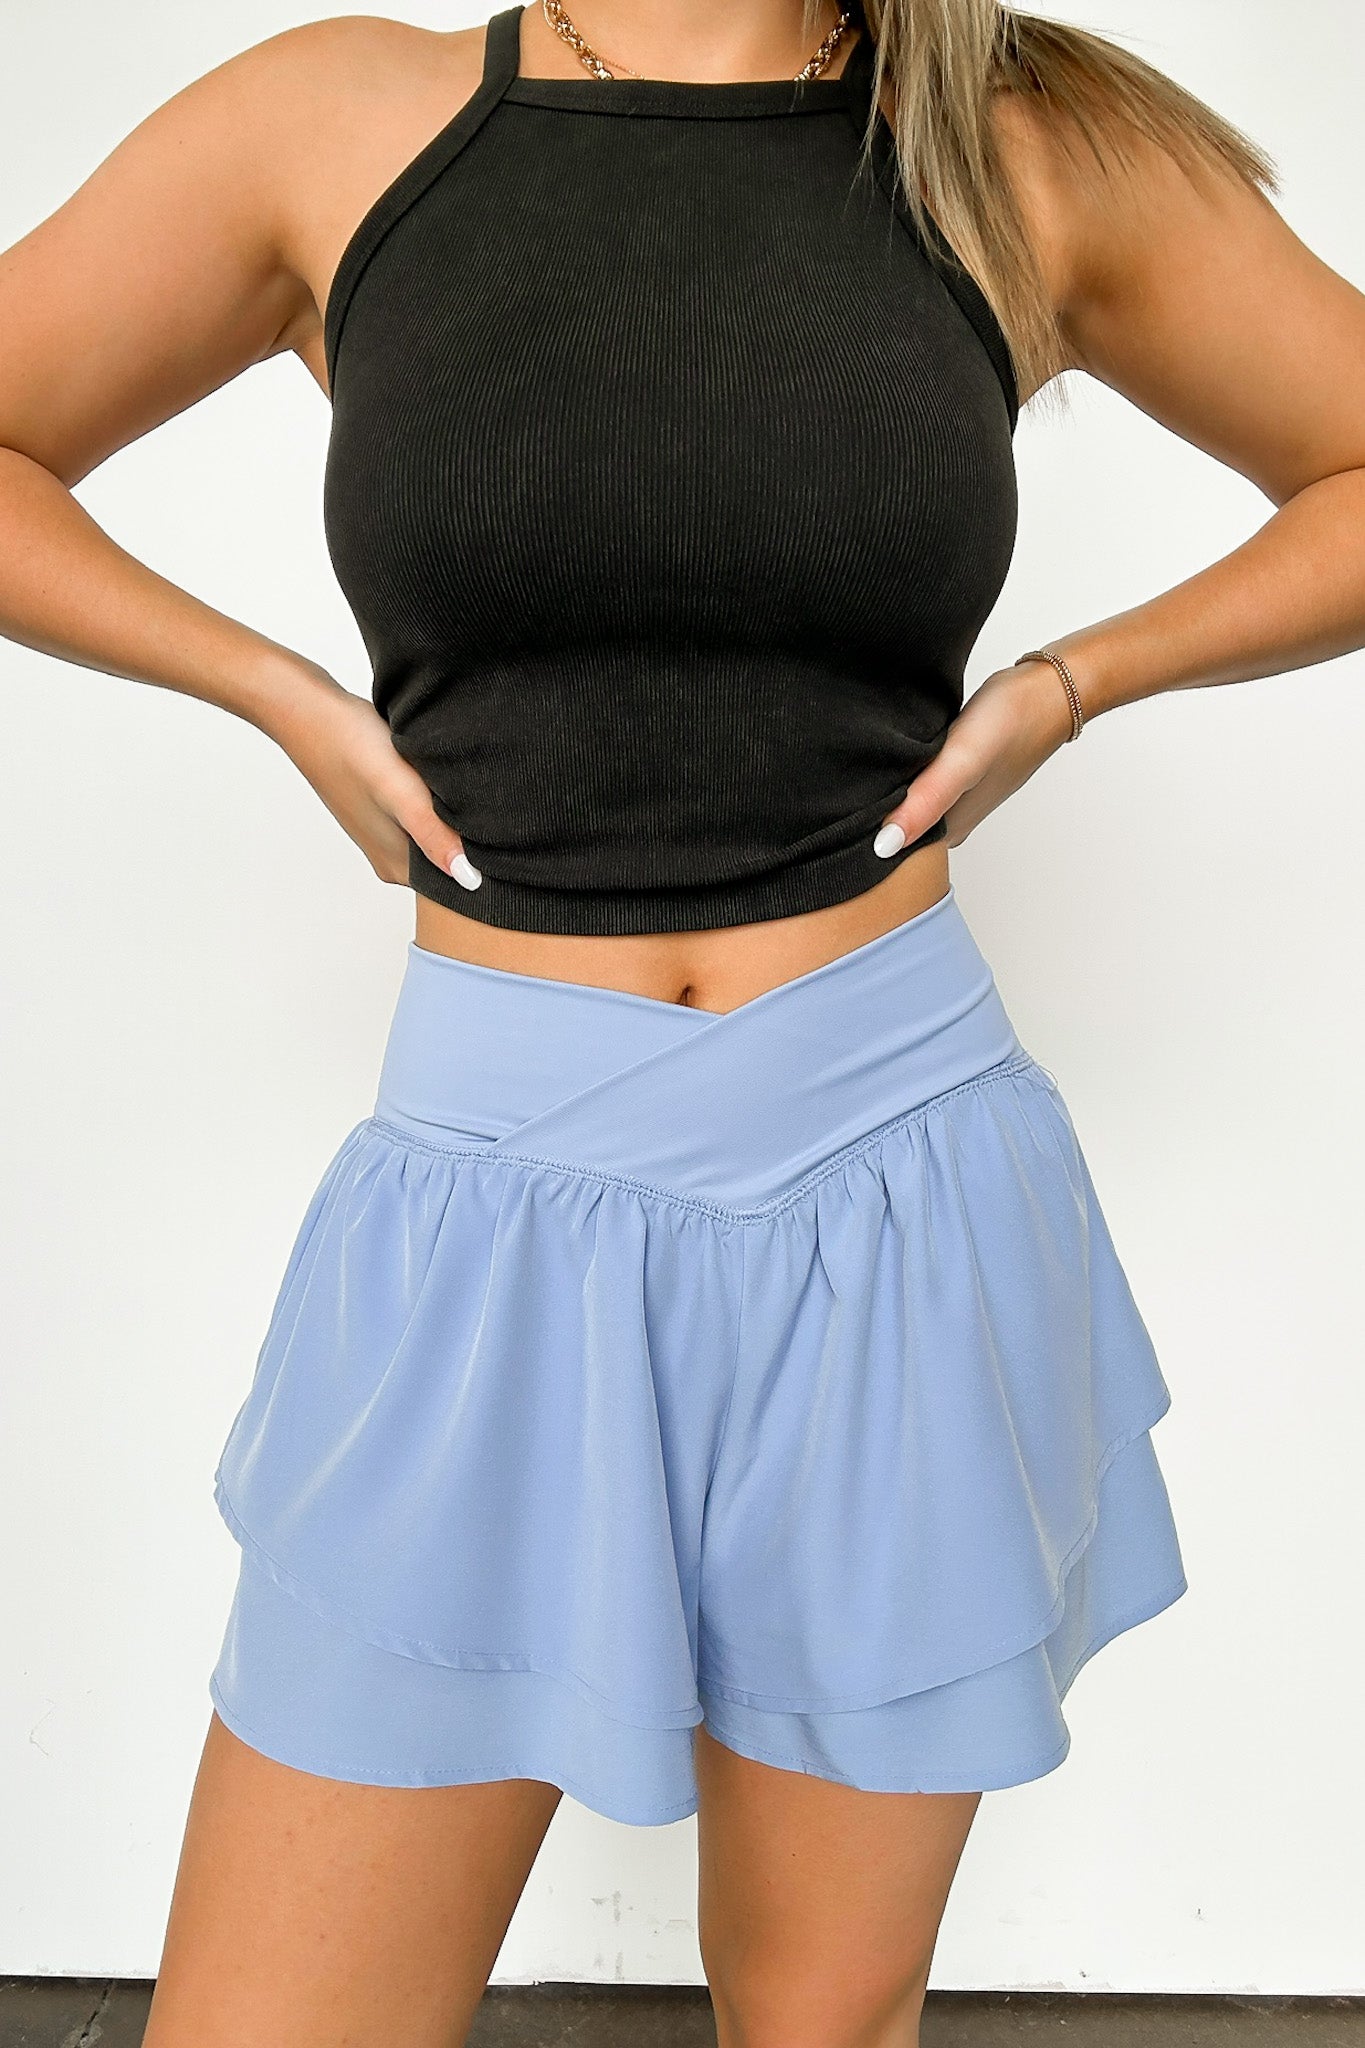  Bright Disposition Ruffle Flowy Athletic Shorts - Madison and Mallory